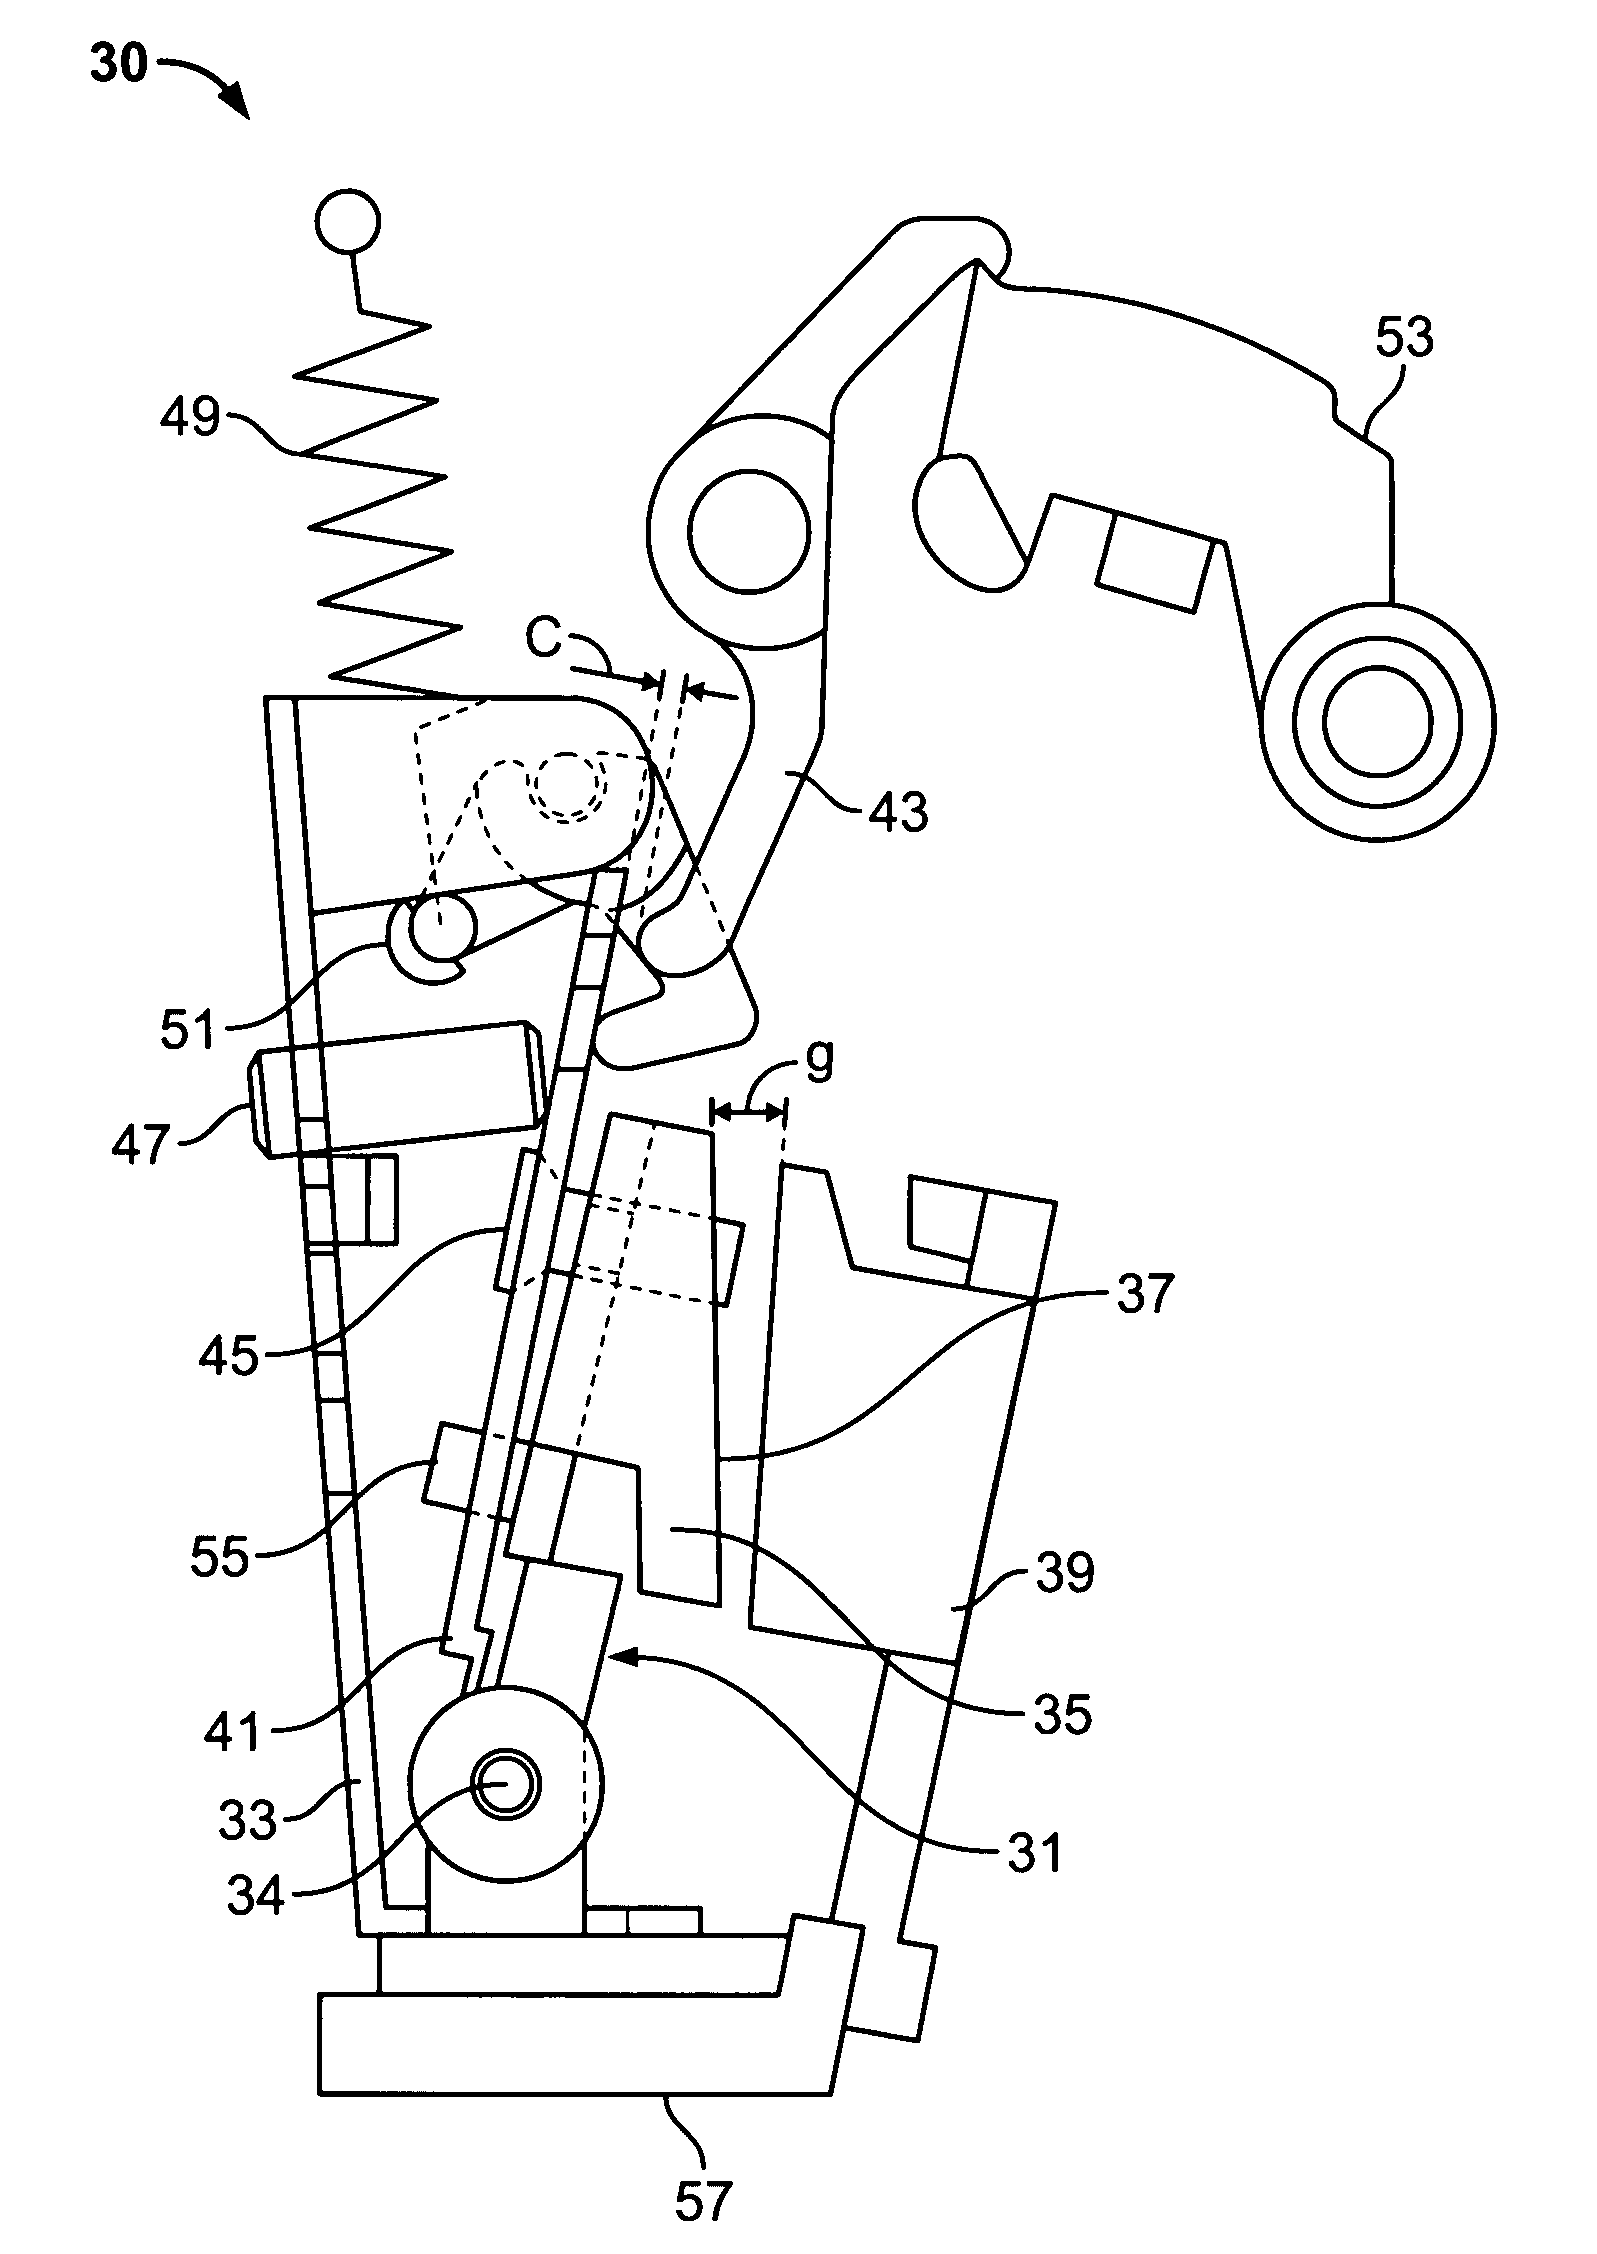 Divided adjustable armature for a circuit breaker